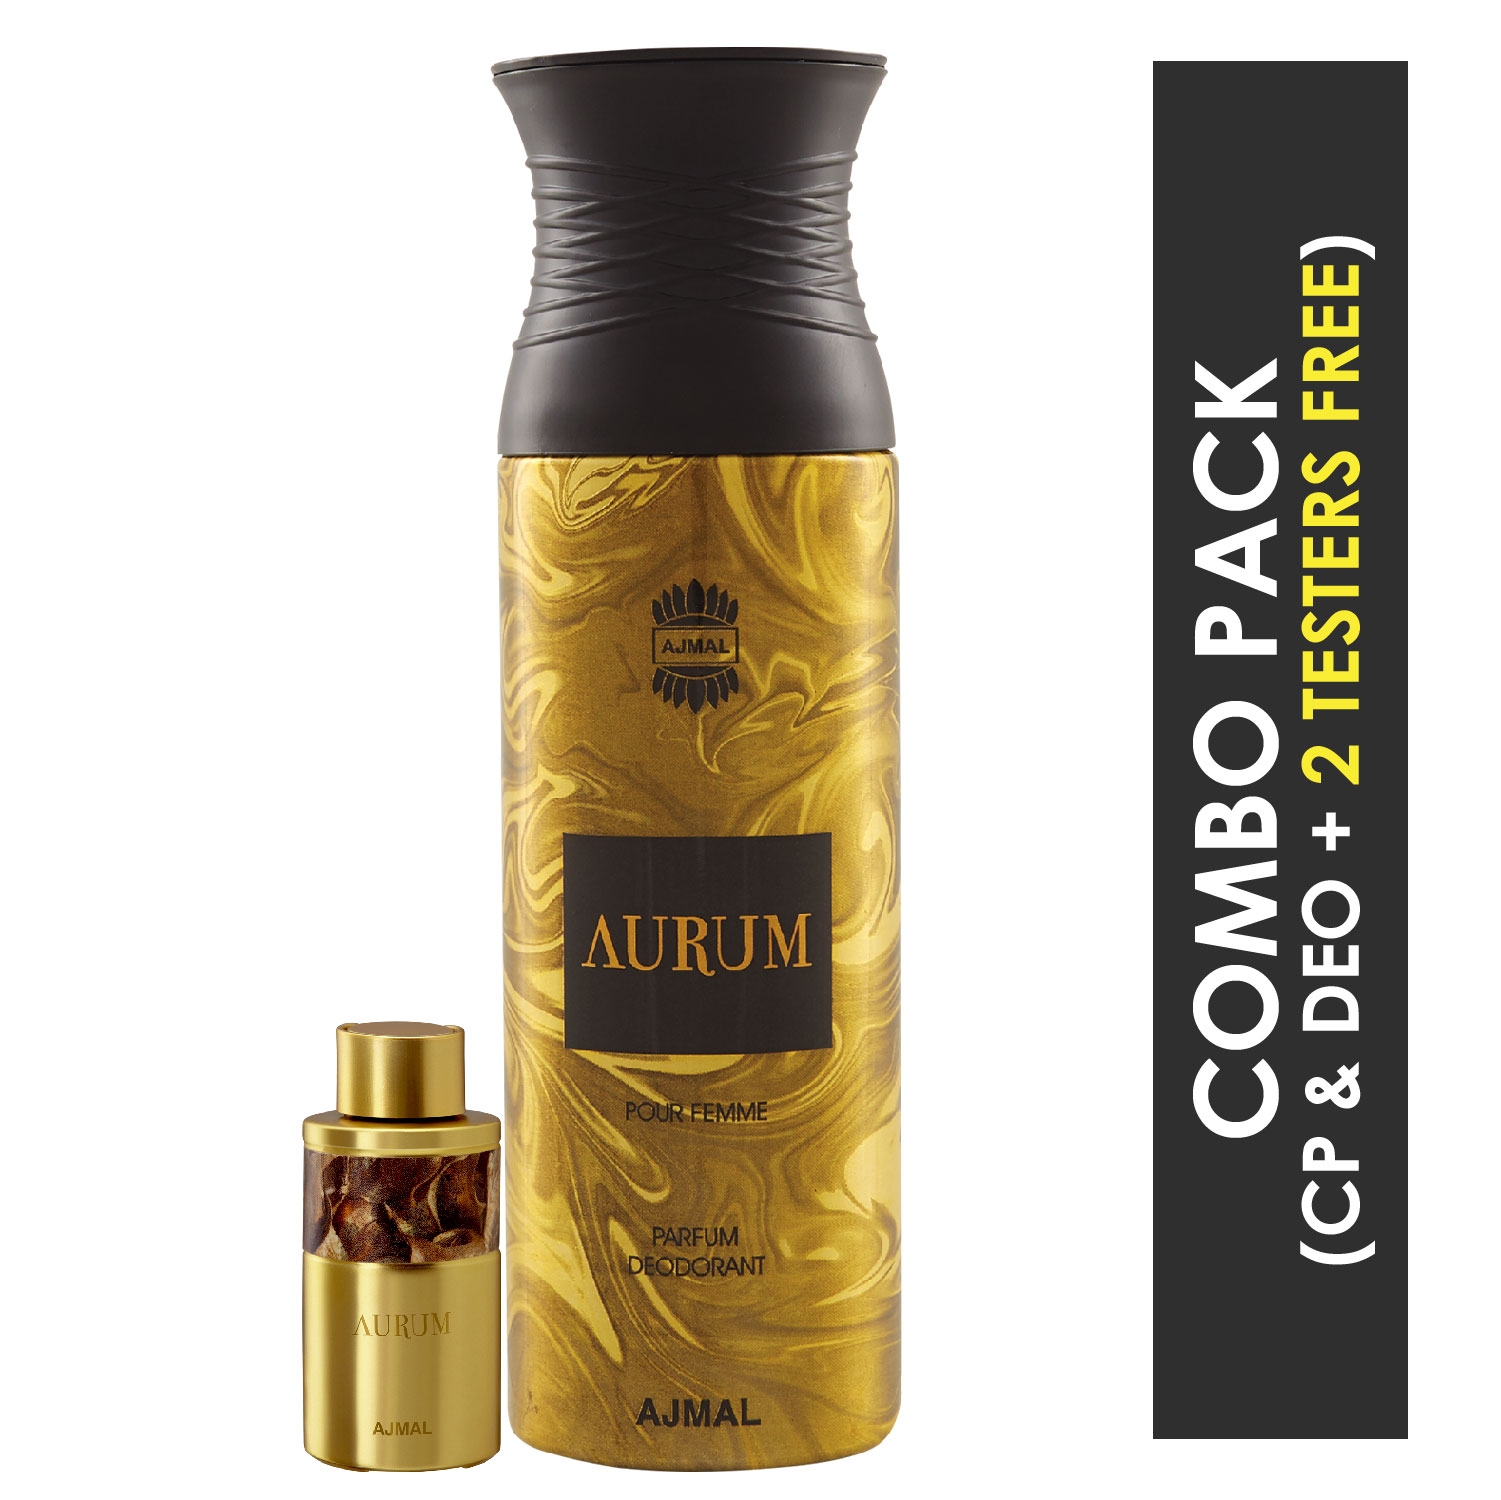 Ajmal | Ajmal Aurum Concentrated Perfume Oil Fruity Floral Alcohol-free Attar 10ml for Women and Aurum Femme Deodorant Fruity Floral Fragrance 200ml for Women + 2 Parfum Testers FREE